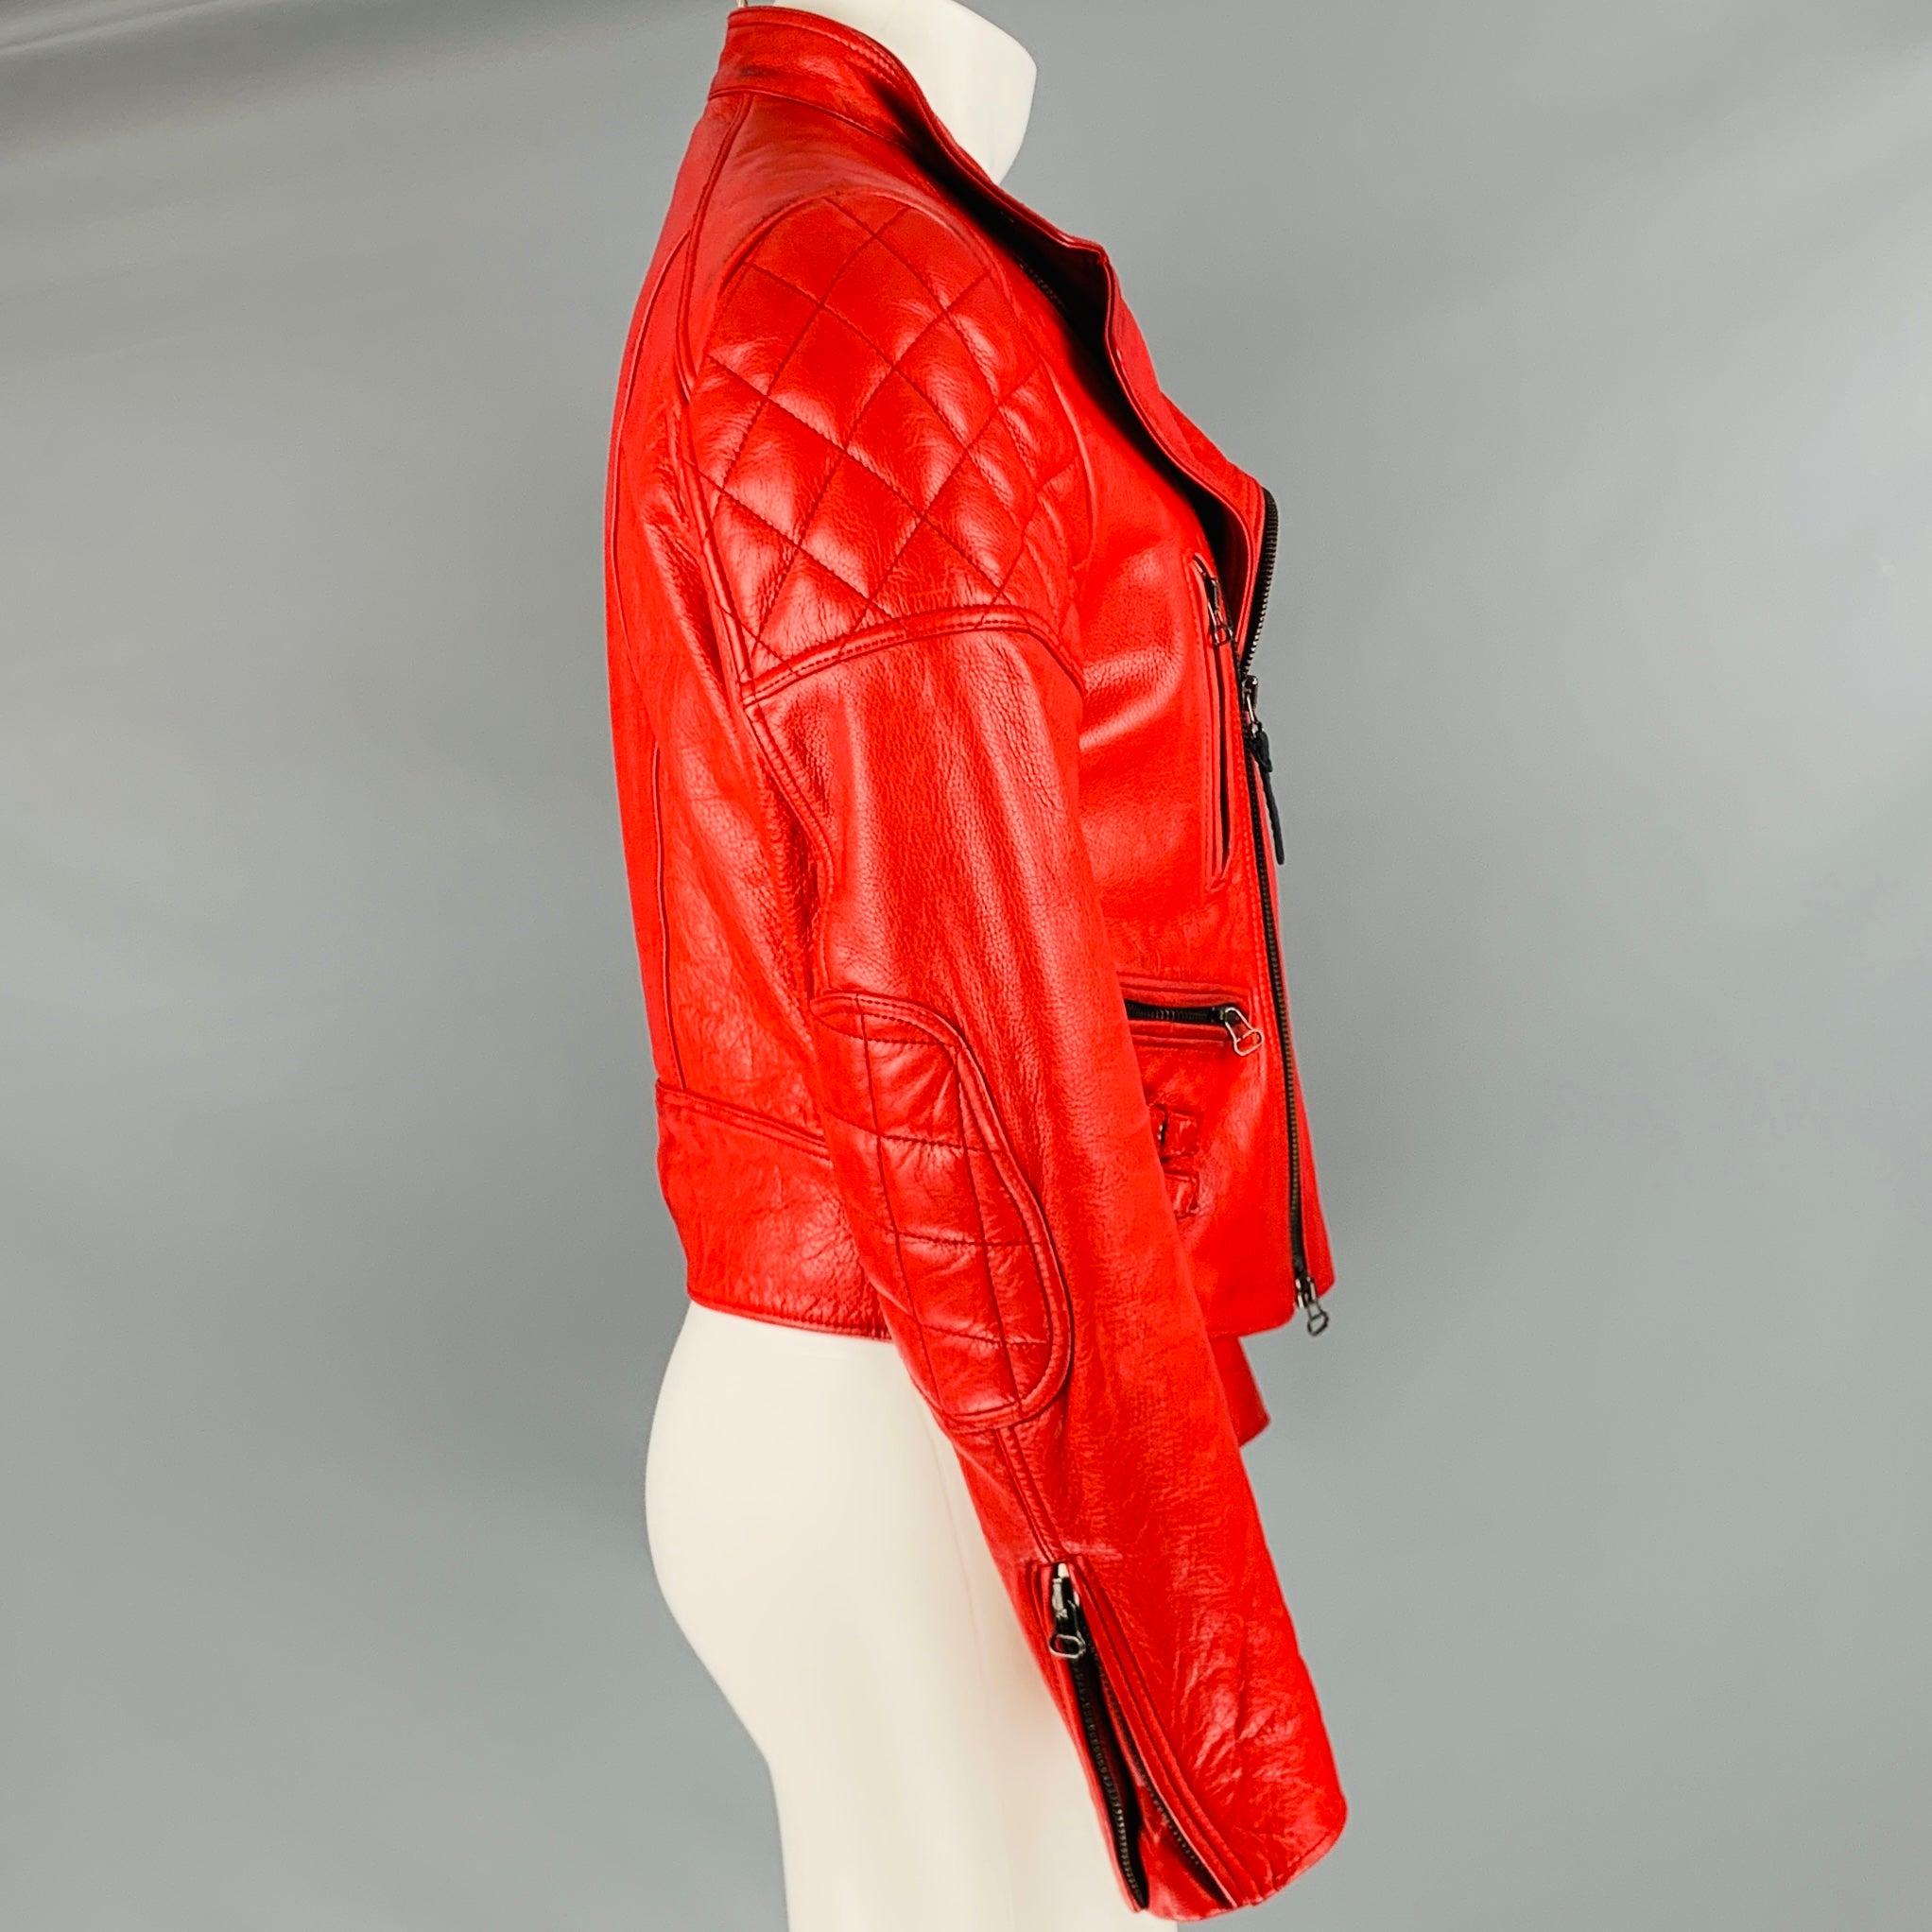 GOODWOOD SPORTS & RACING by BELSTAFF jacket
in a red leather fabric featuring a biker style, quilted shoulders, and zip up style. Good Pre-Owned Condition. As is, please check photos. 

Marked:   21020019 

Measurements: 
 
Shoulder: 18 inches